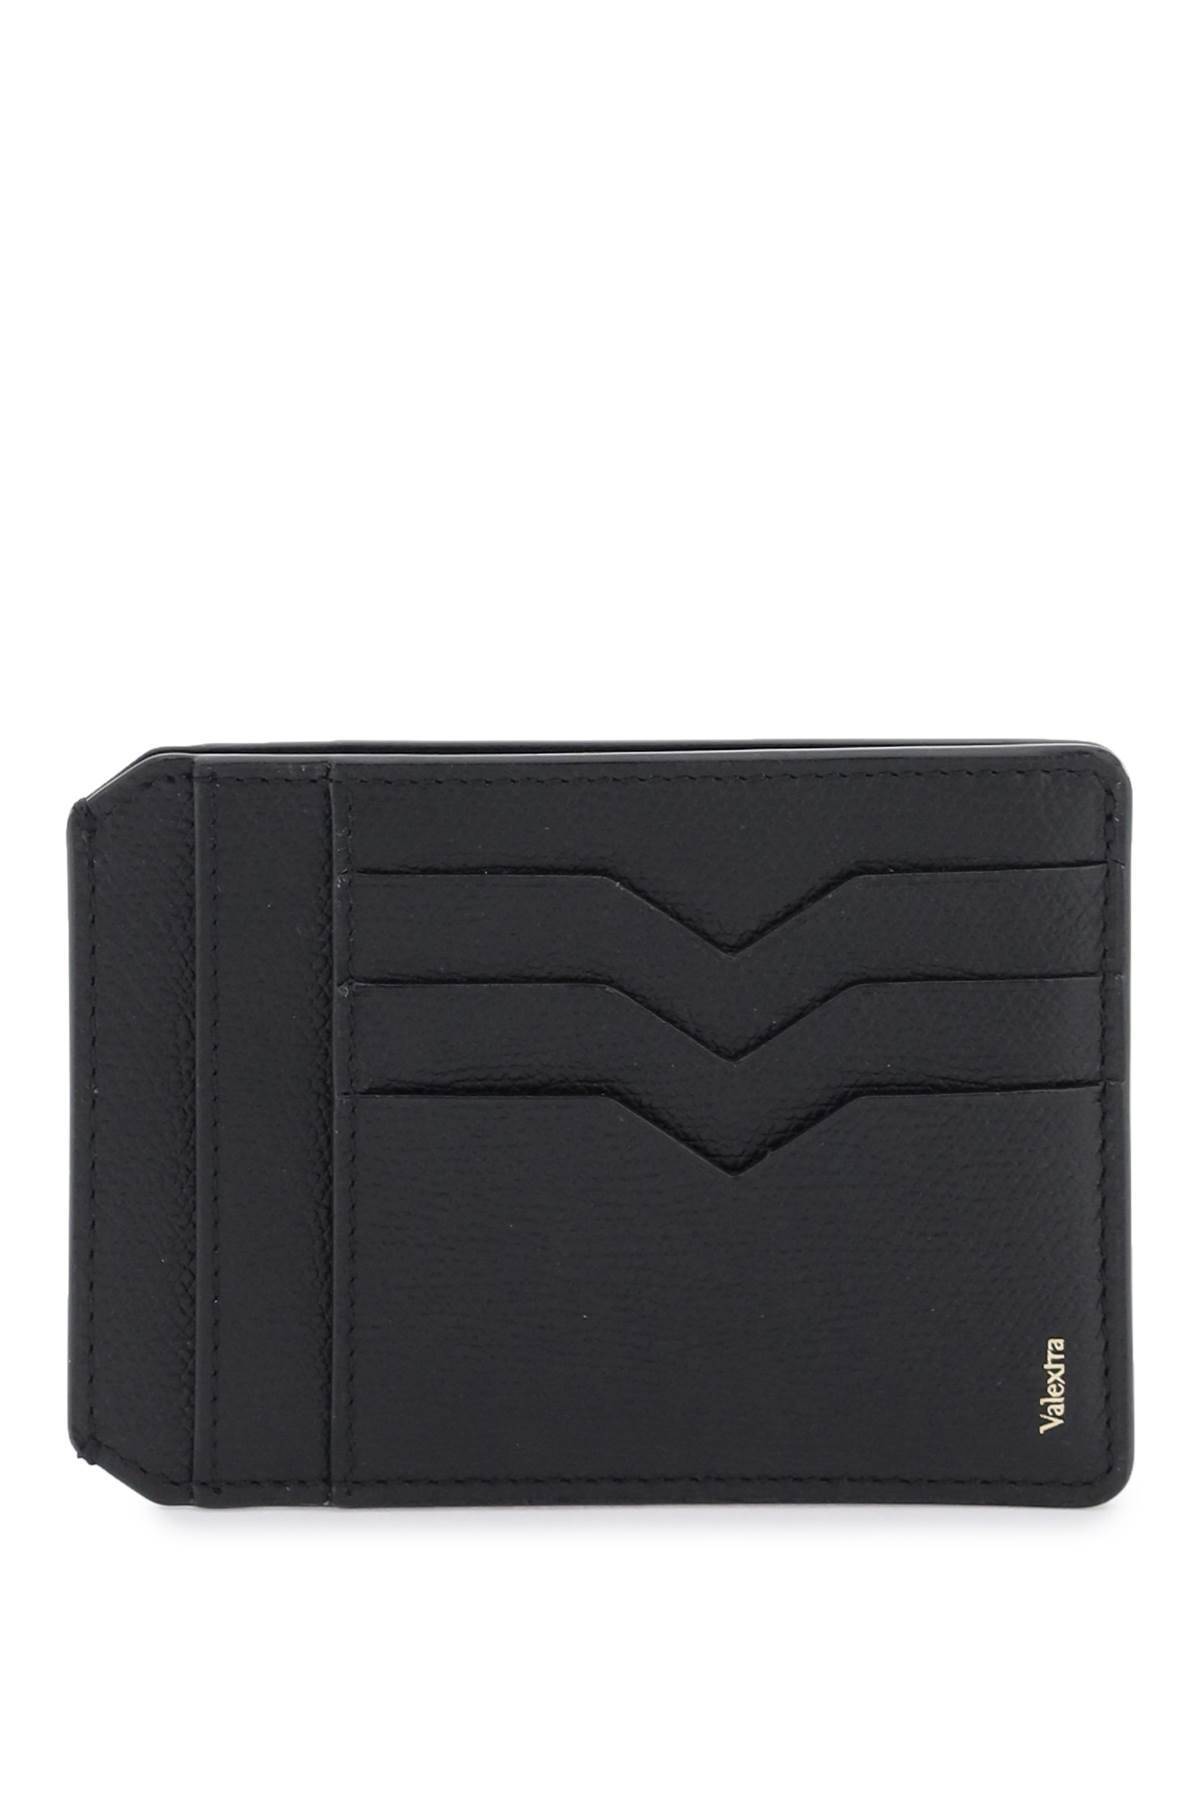 Valextra Leather Credit Card Holder In Black